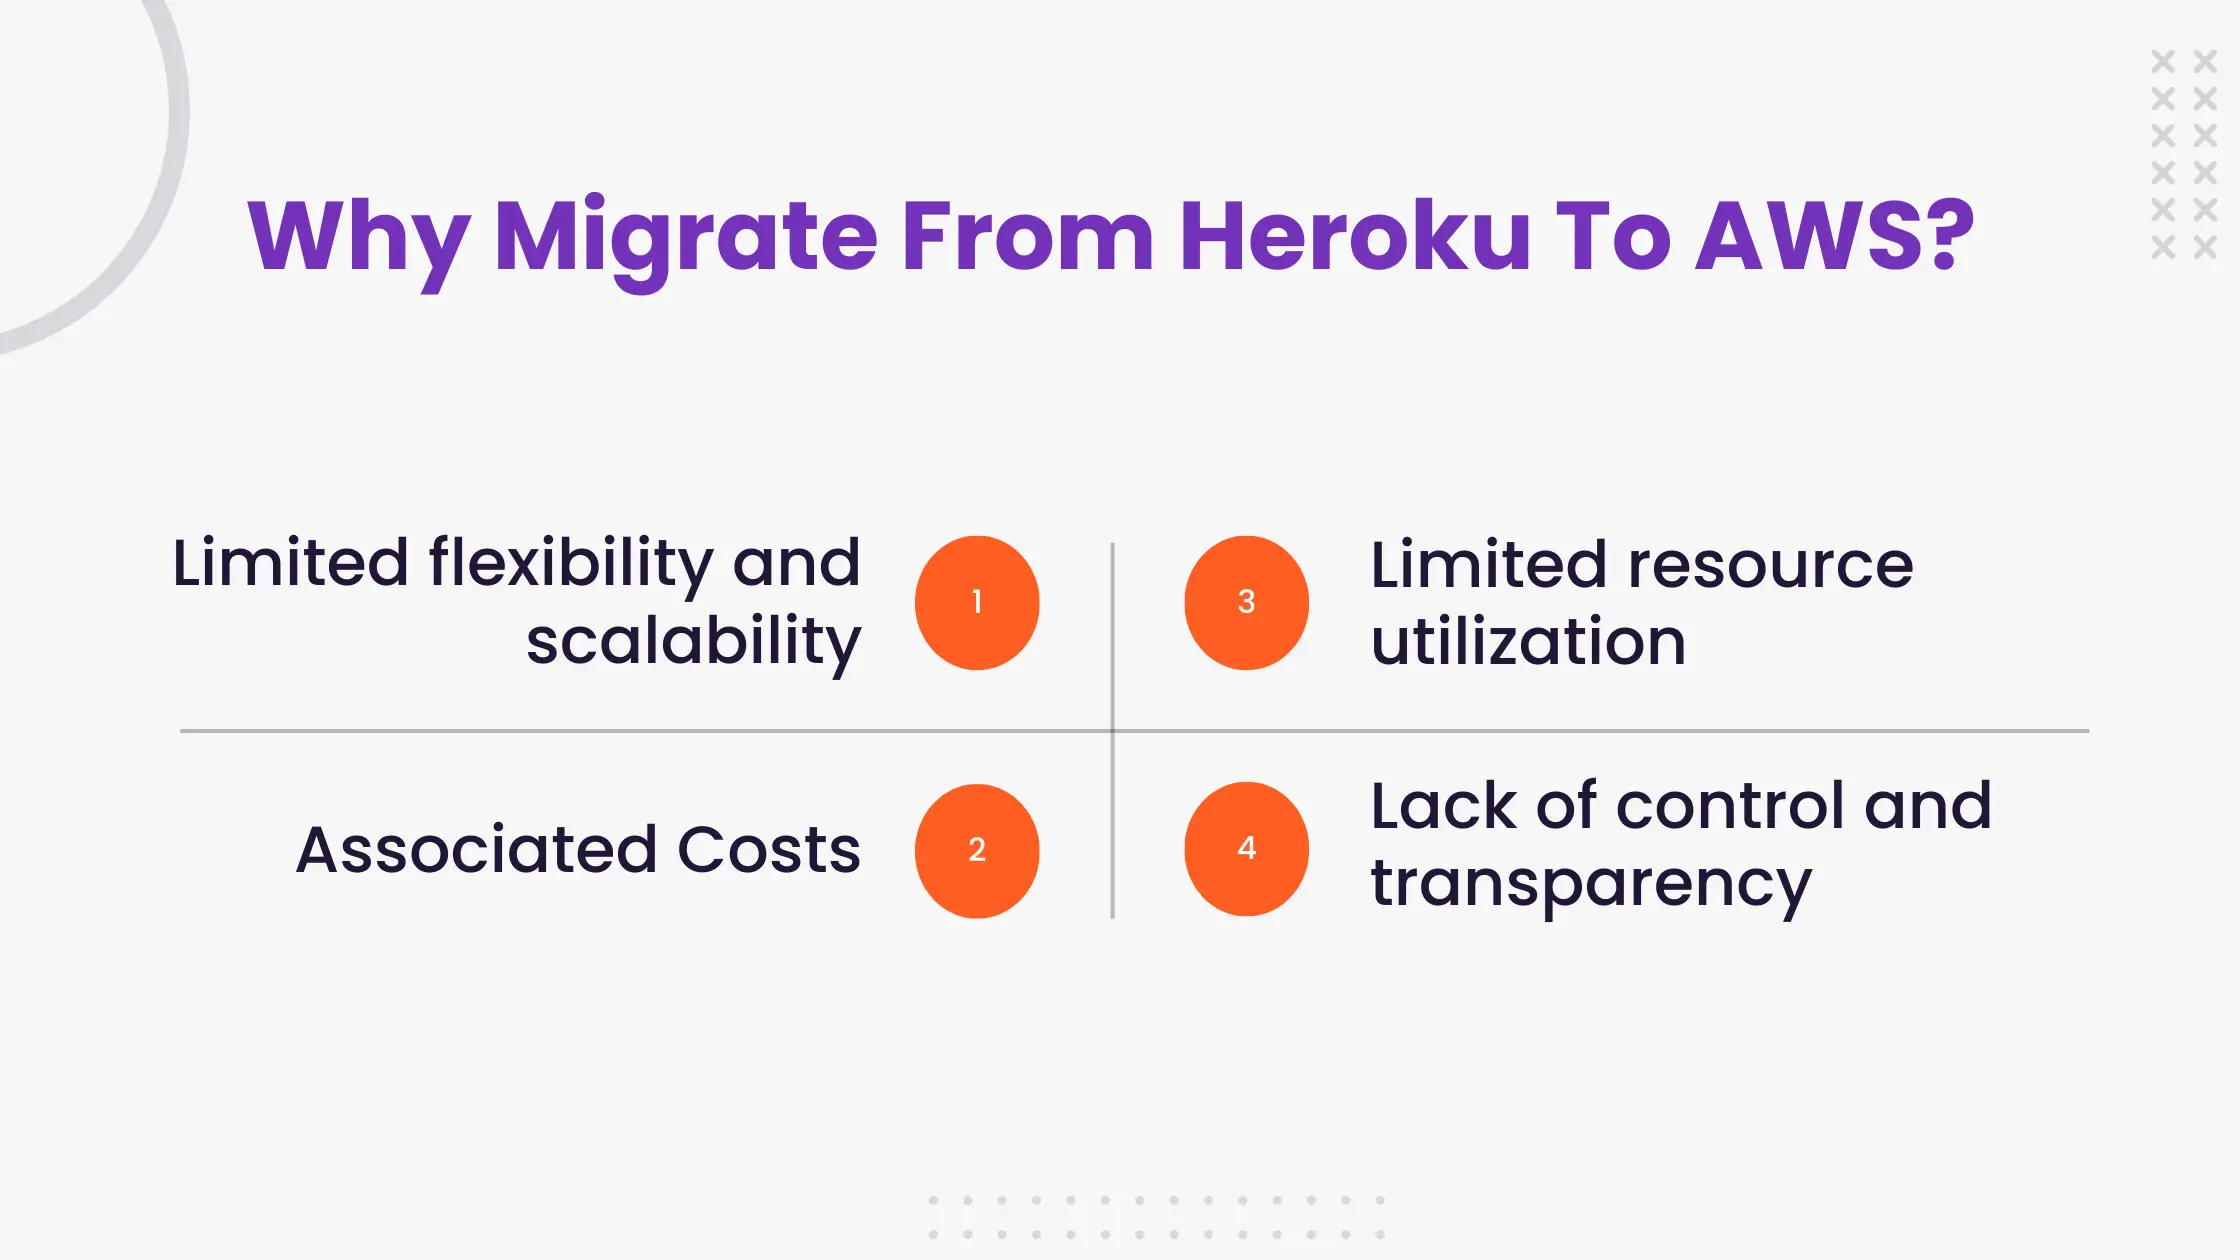 Why Migrate From Heroku To AWS